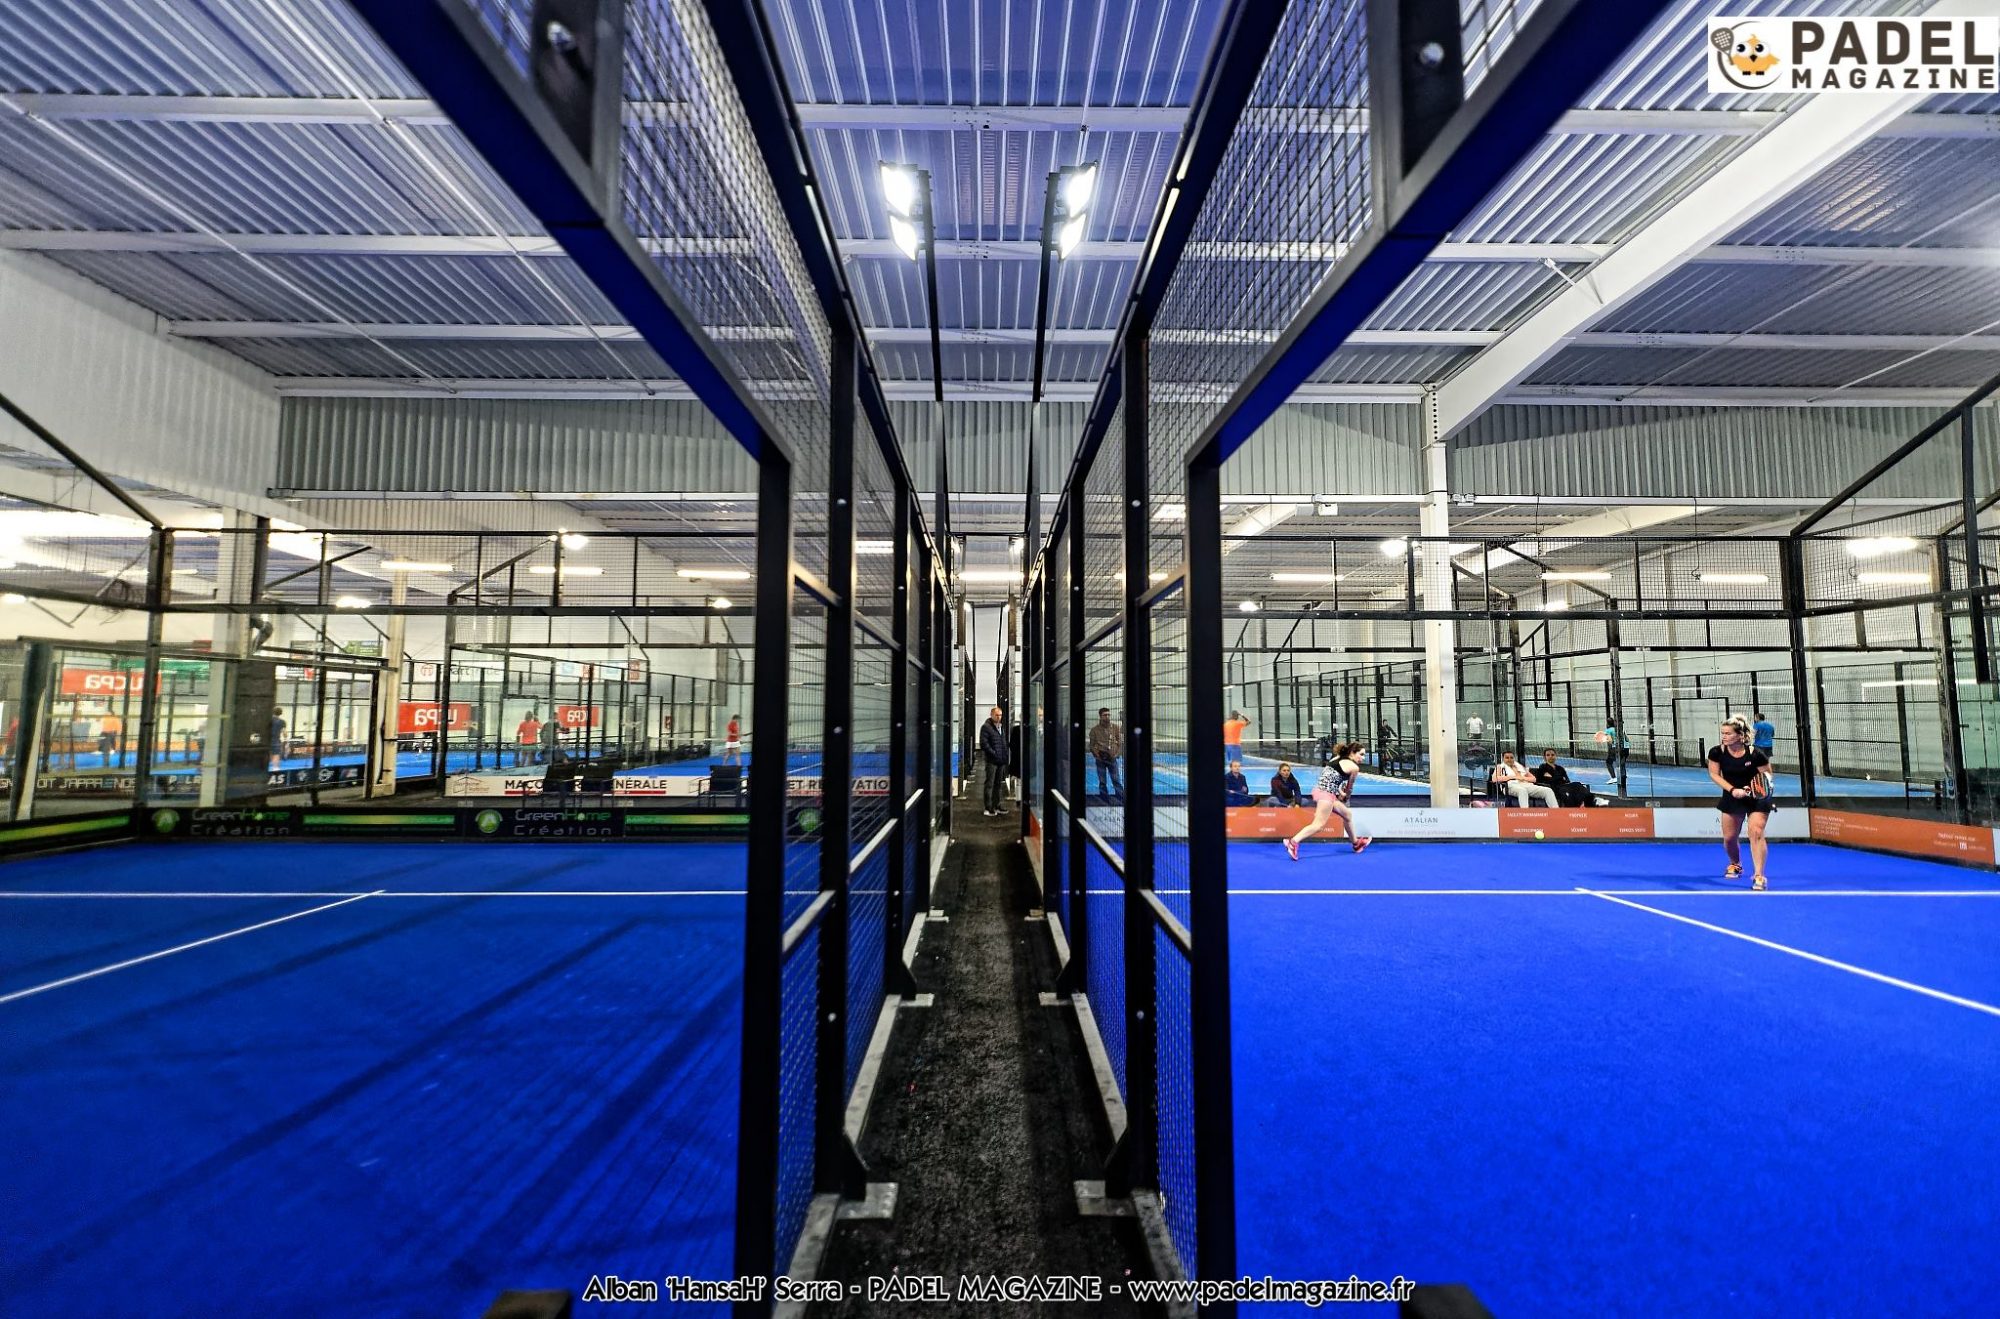 FFT Padel Toulouse Tower: information